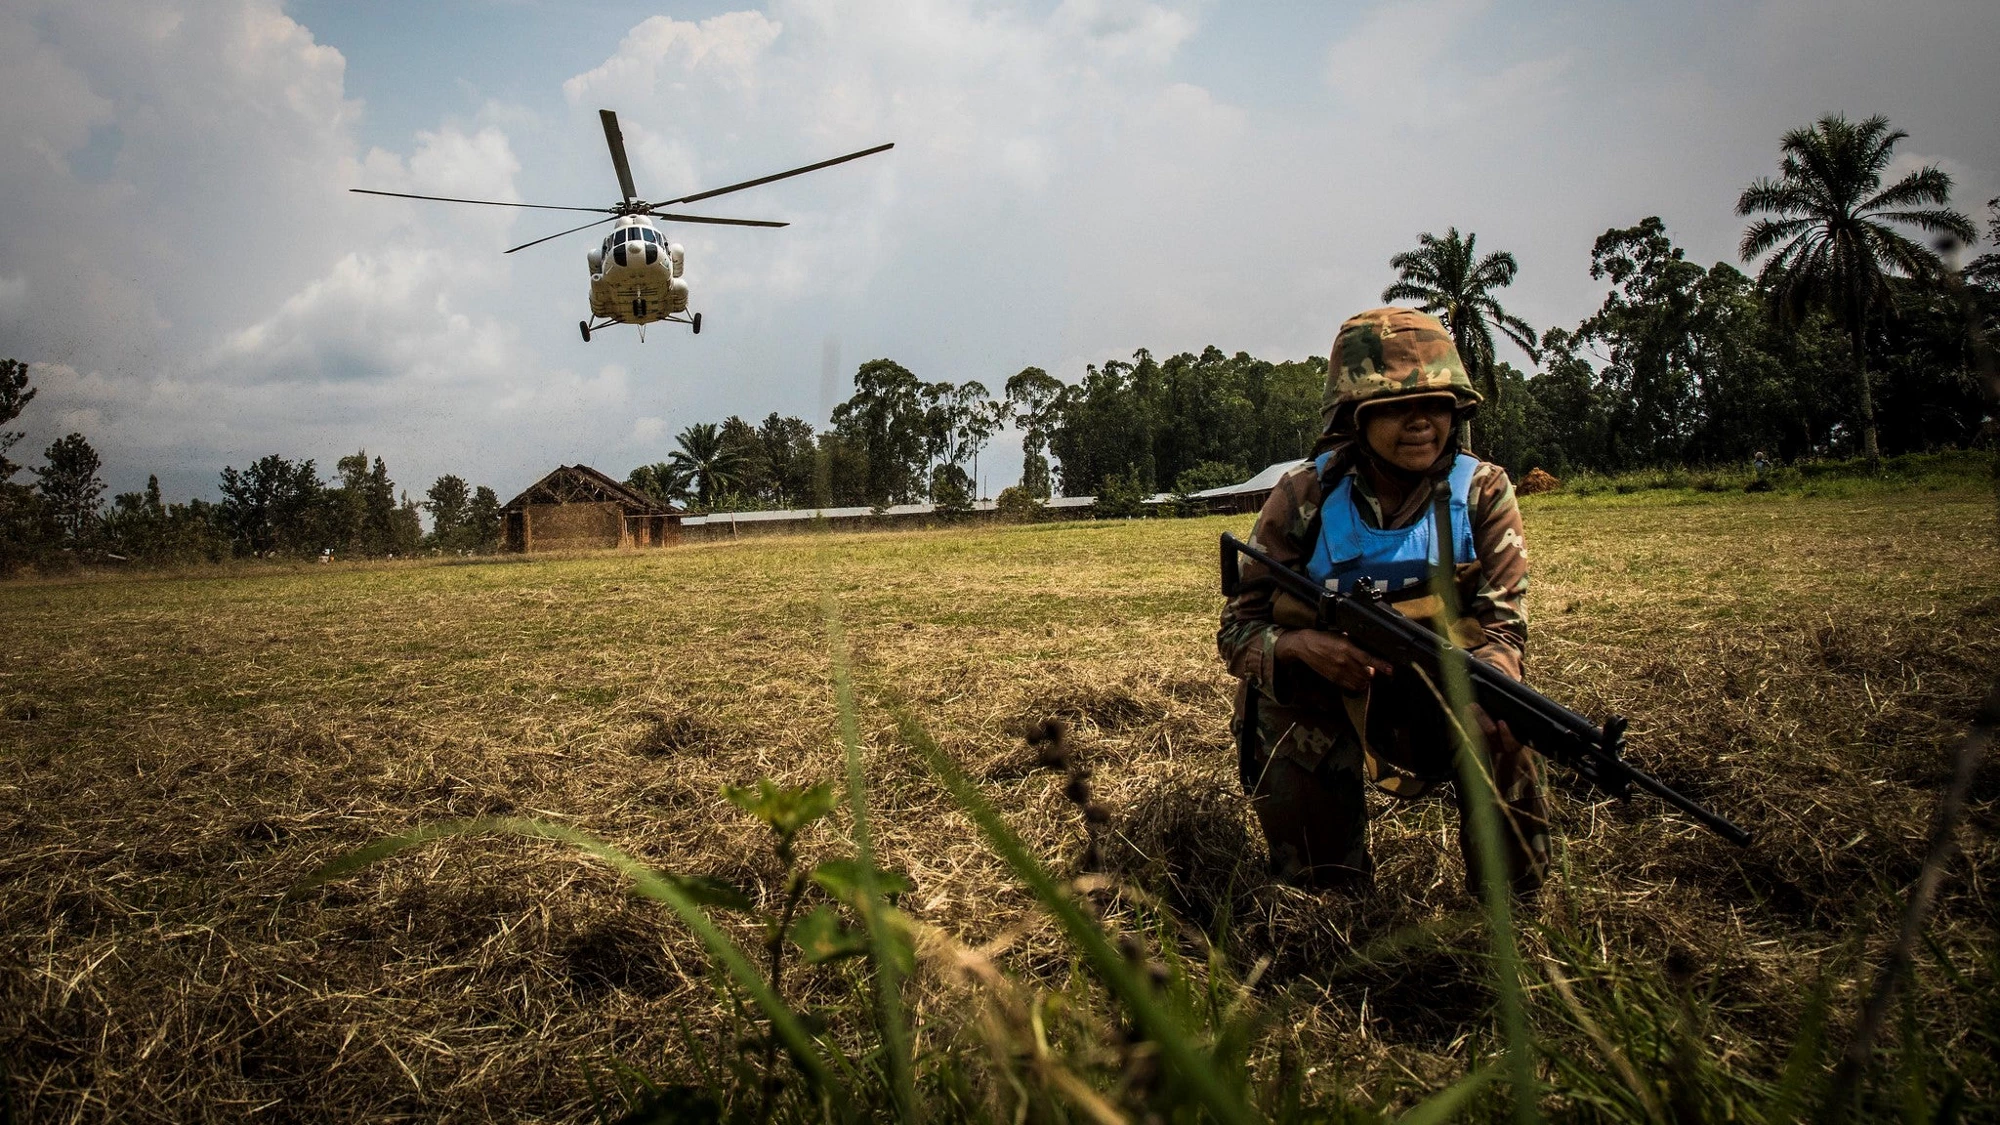 A trip to the front lines of the fight against Ebola in the Democratic Republic of Congo: A MONUSCO soldier monitors the security situation while a helicopter leaves. © World Bank/ Vincent Tremeau